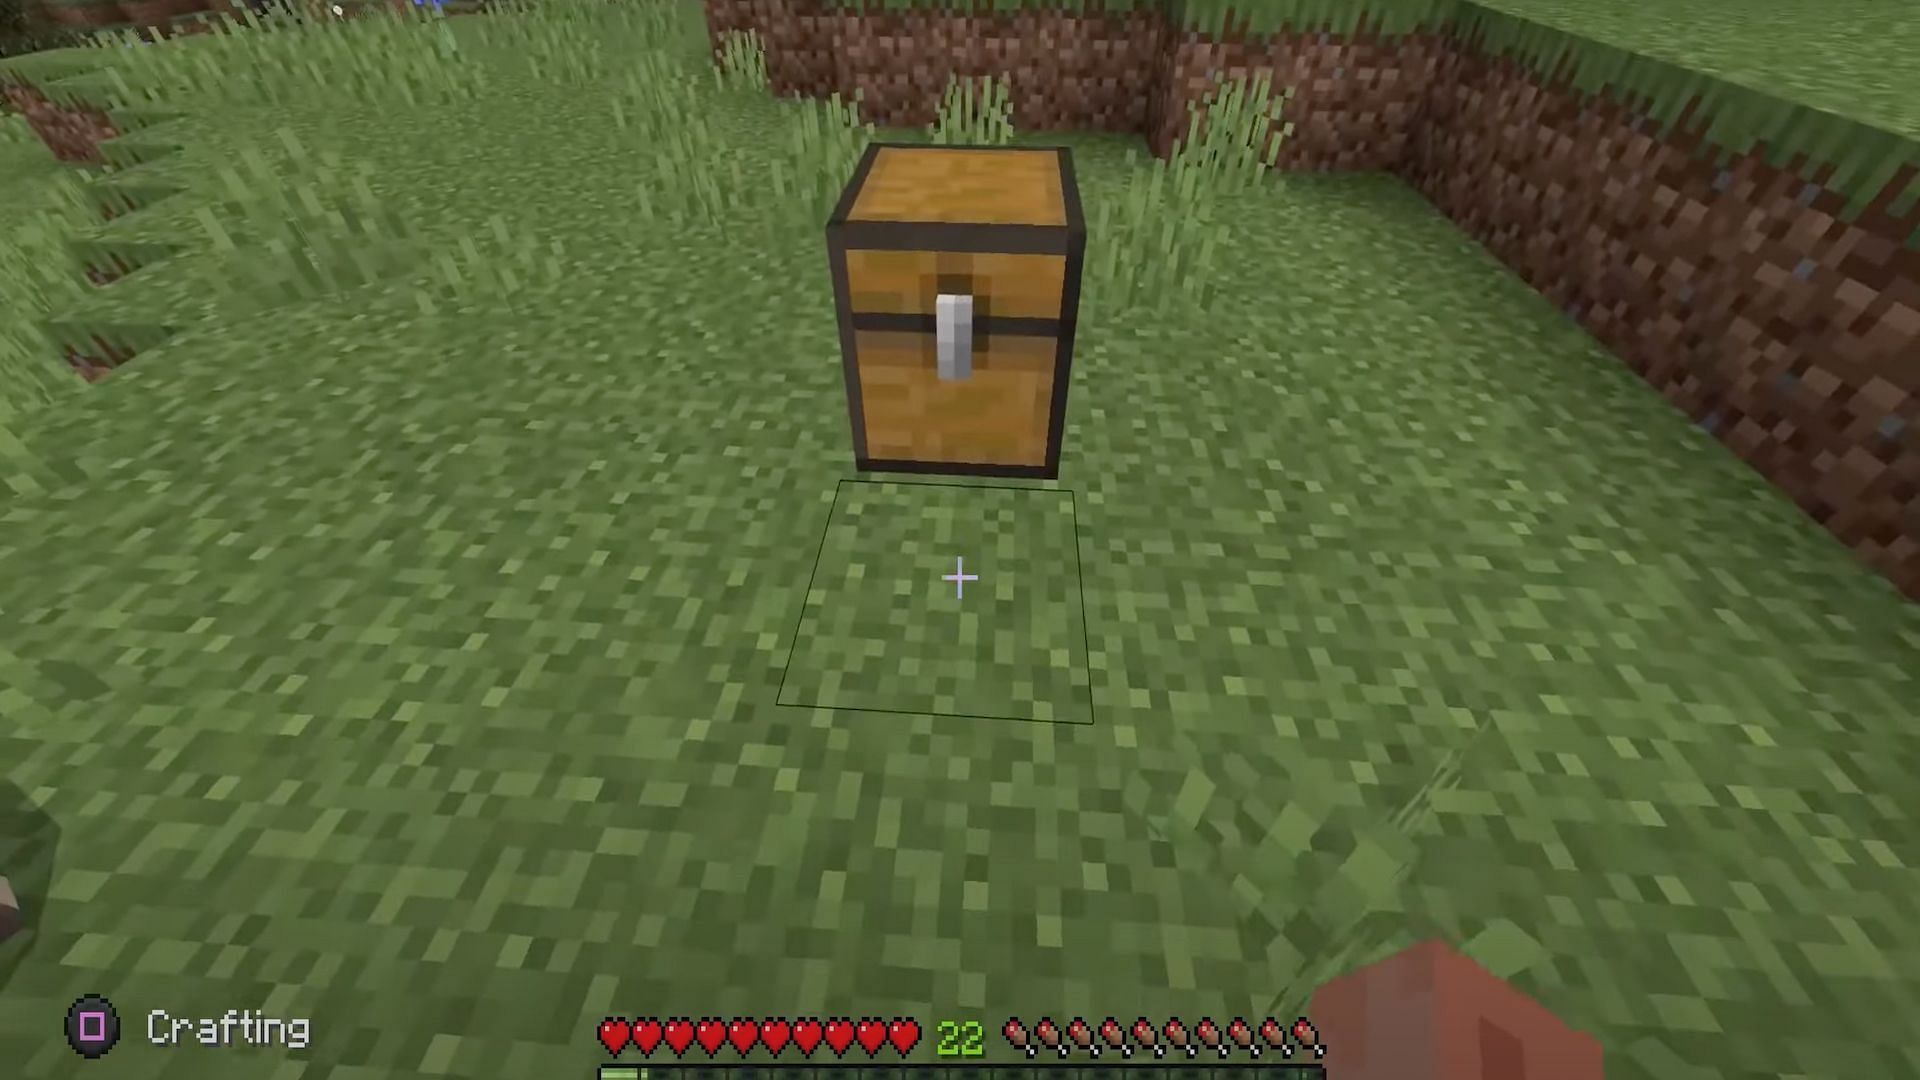 Players should place a chest down in an open area (Image via SuperXee/YouTube)